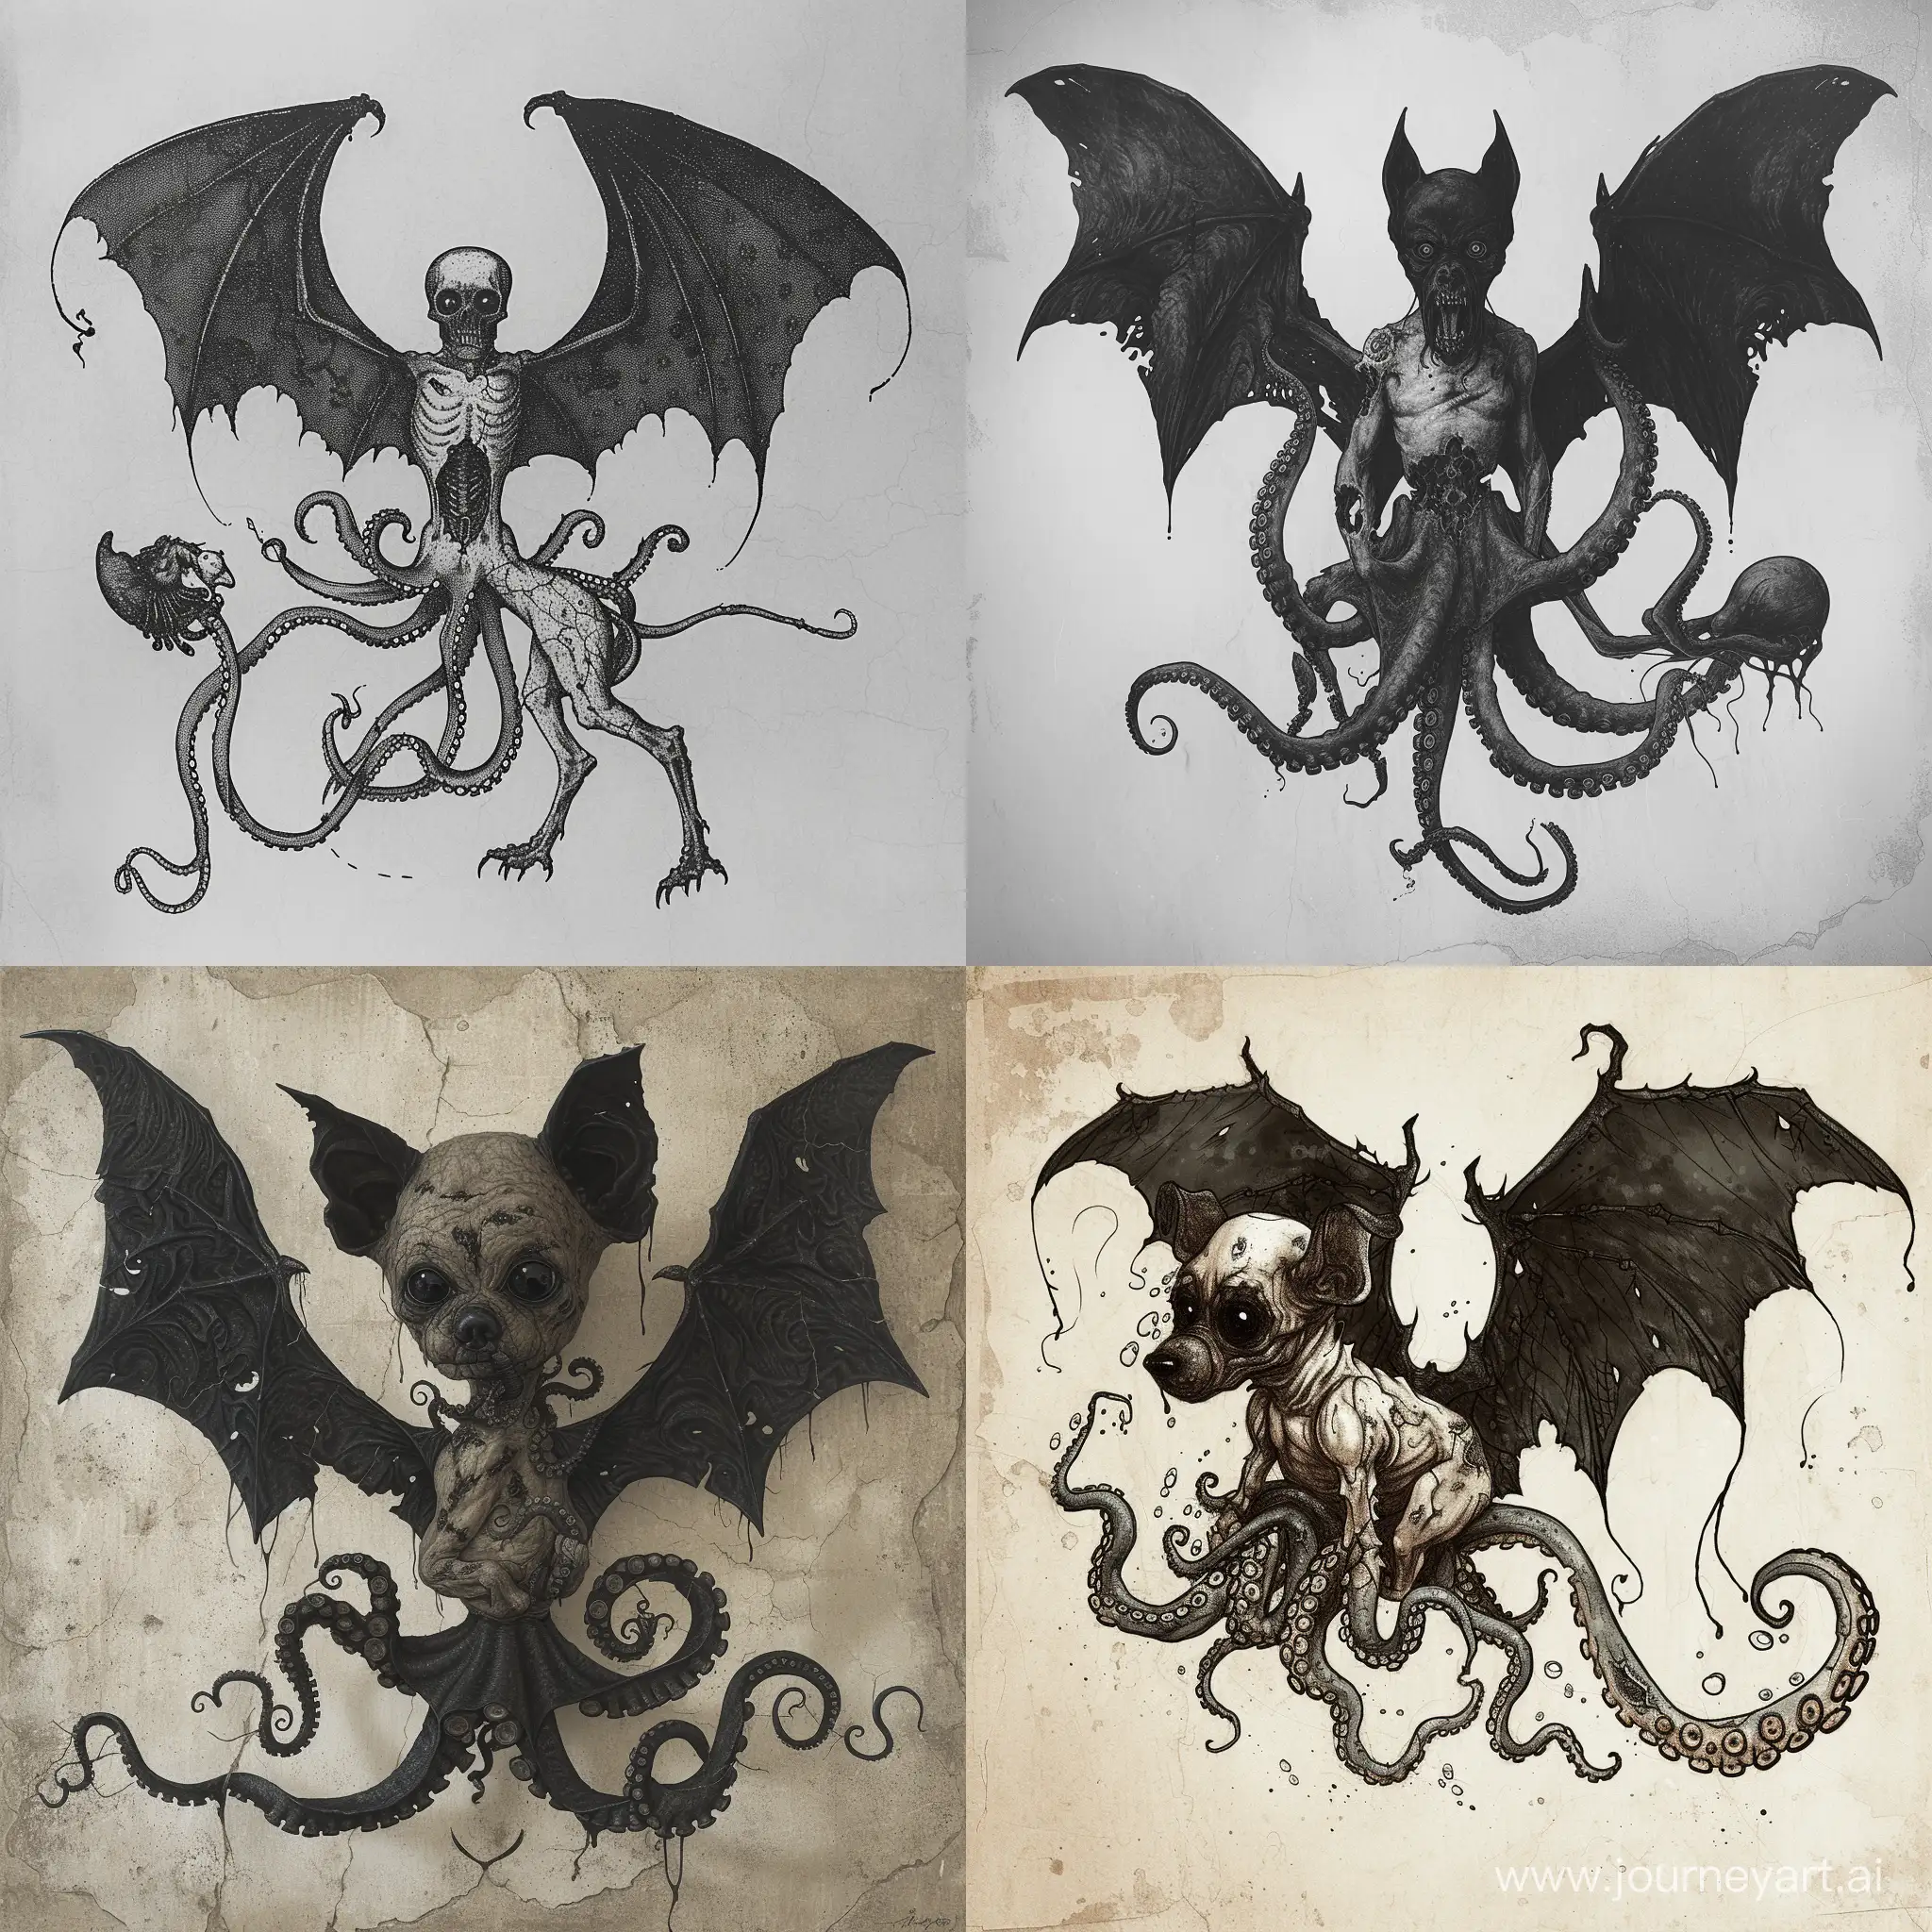 Monstrous-Chimera-with-Bat-Wings-and-Octopus-Tentacles